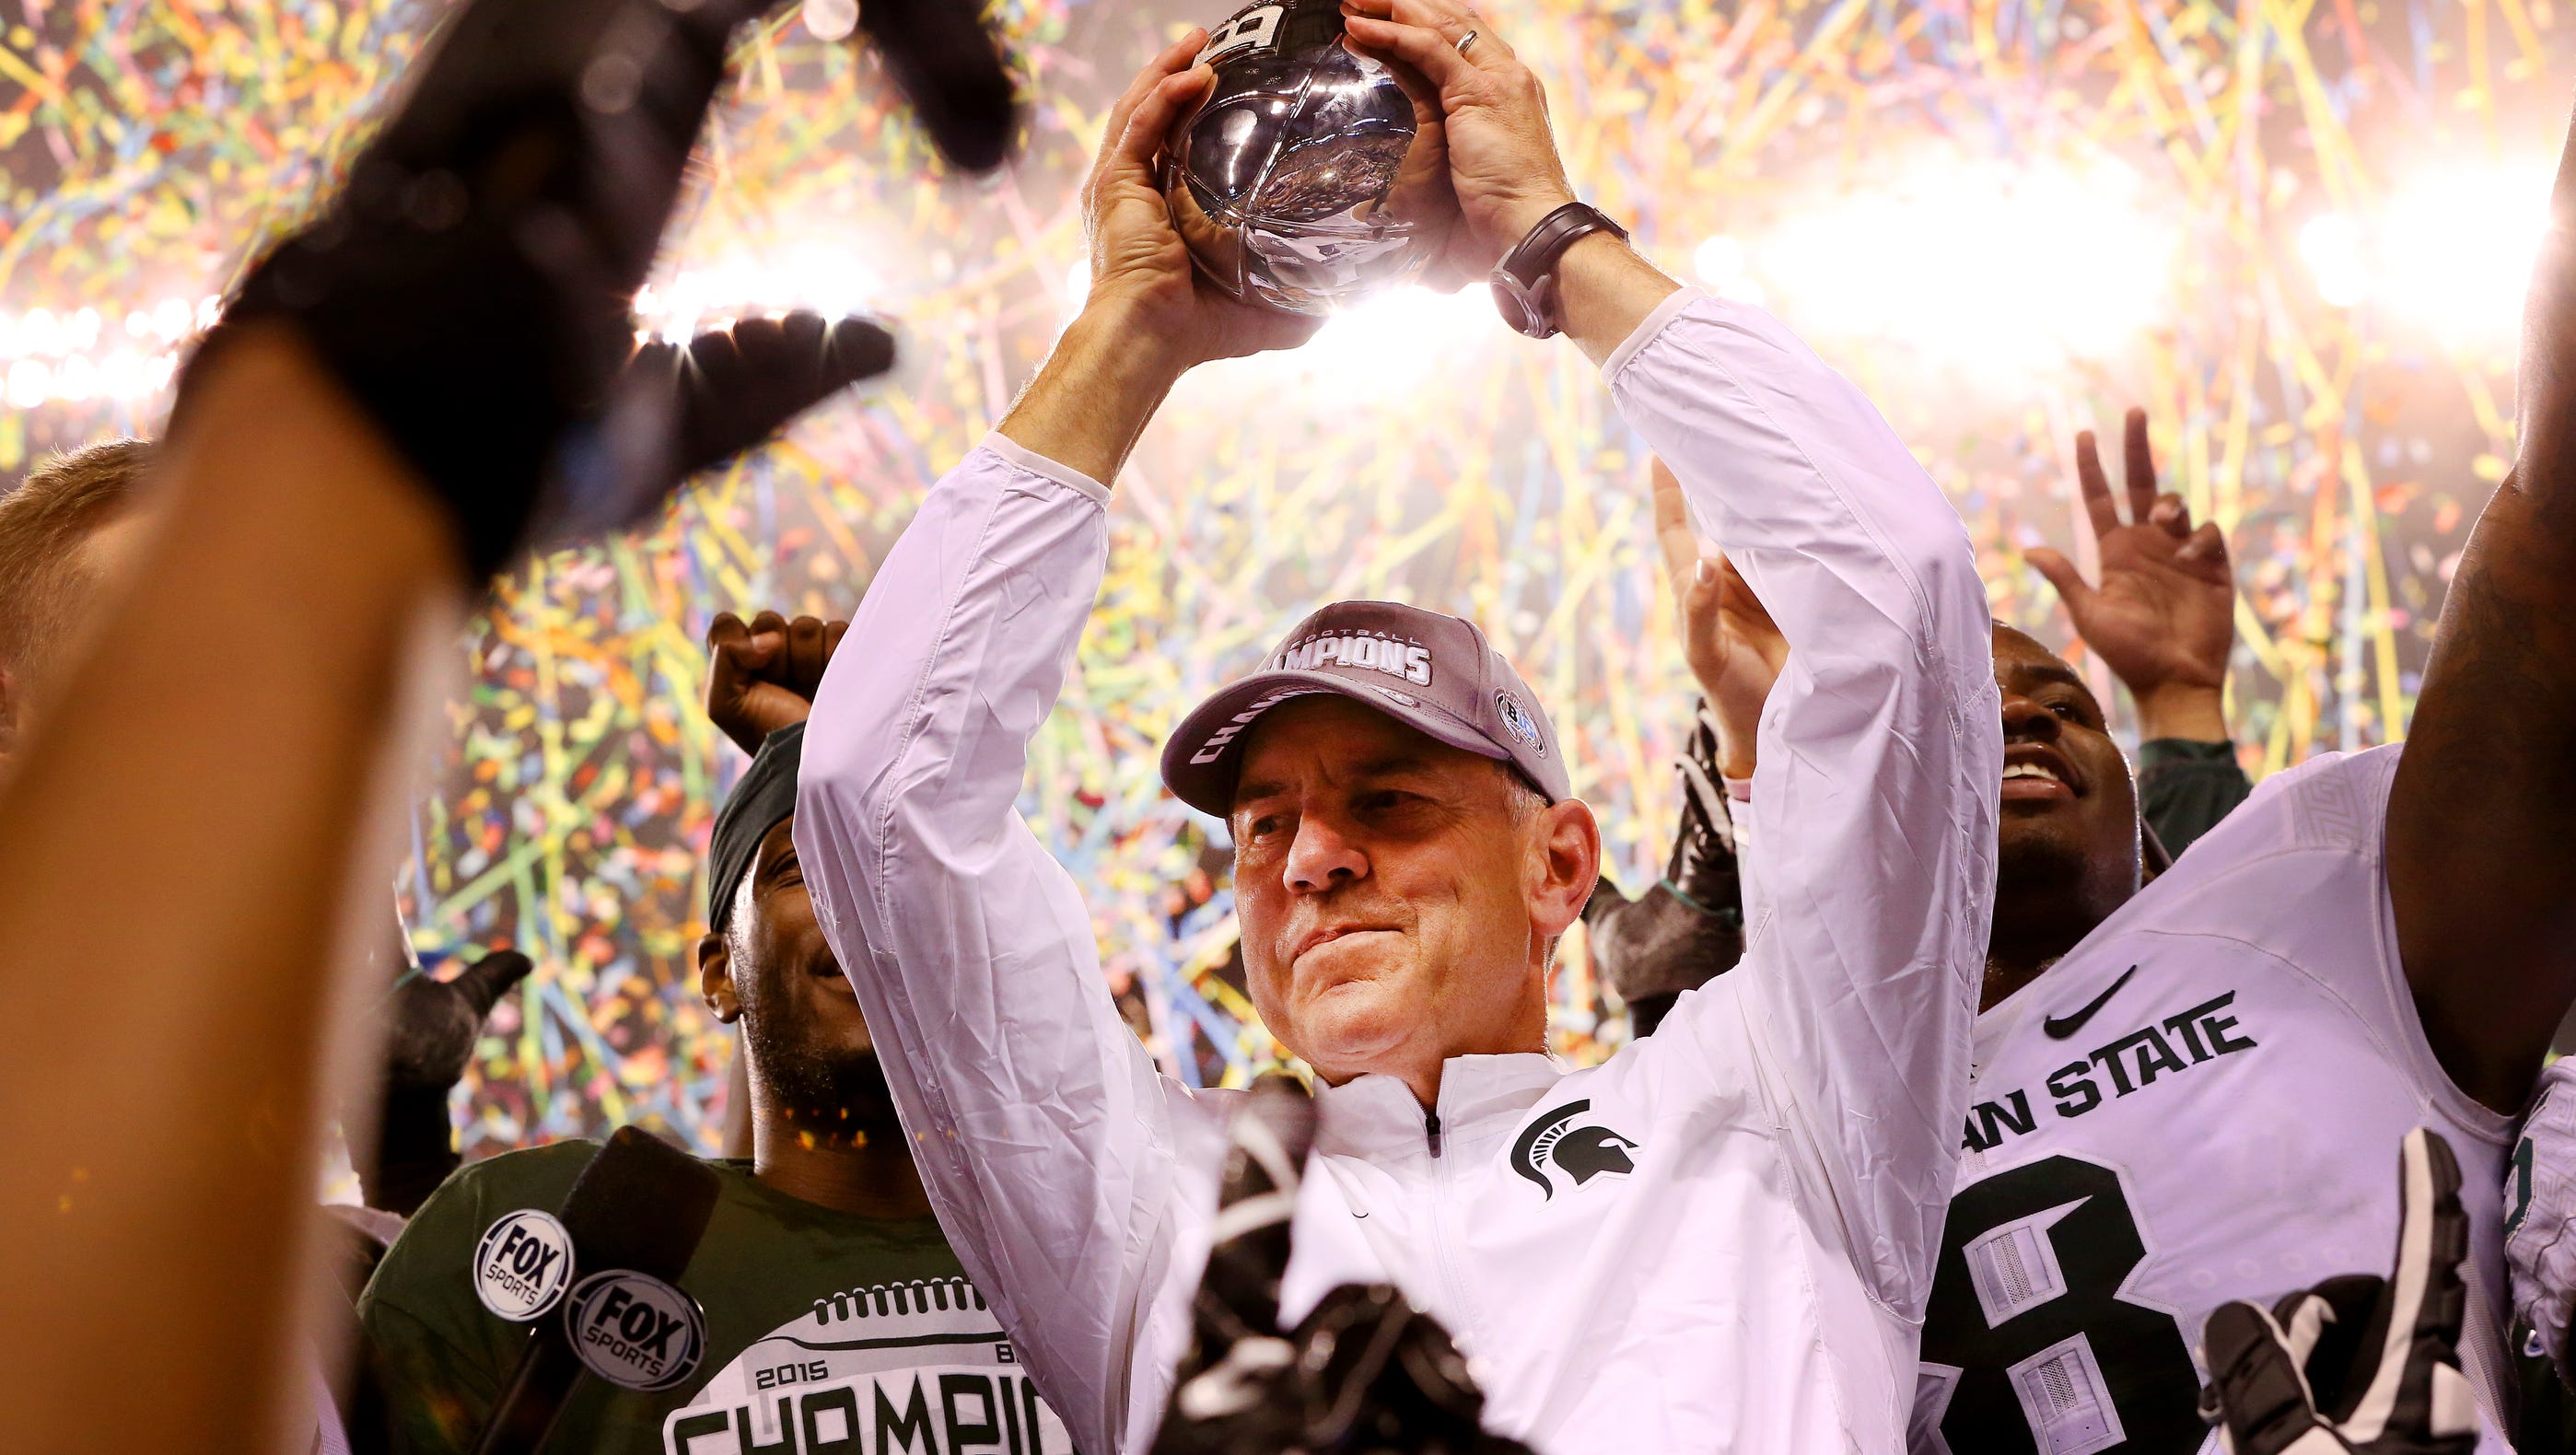 Michigan State head football coach Mark Dantonio holds up the Amos Alonzo Stagg Championship Trophy after the win against Iowa in the Big Ten Championship Game at Lucas Oil Stadium on Dec. 5, 2015.